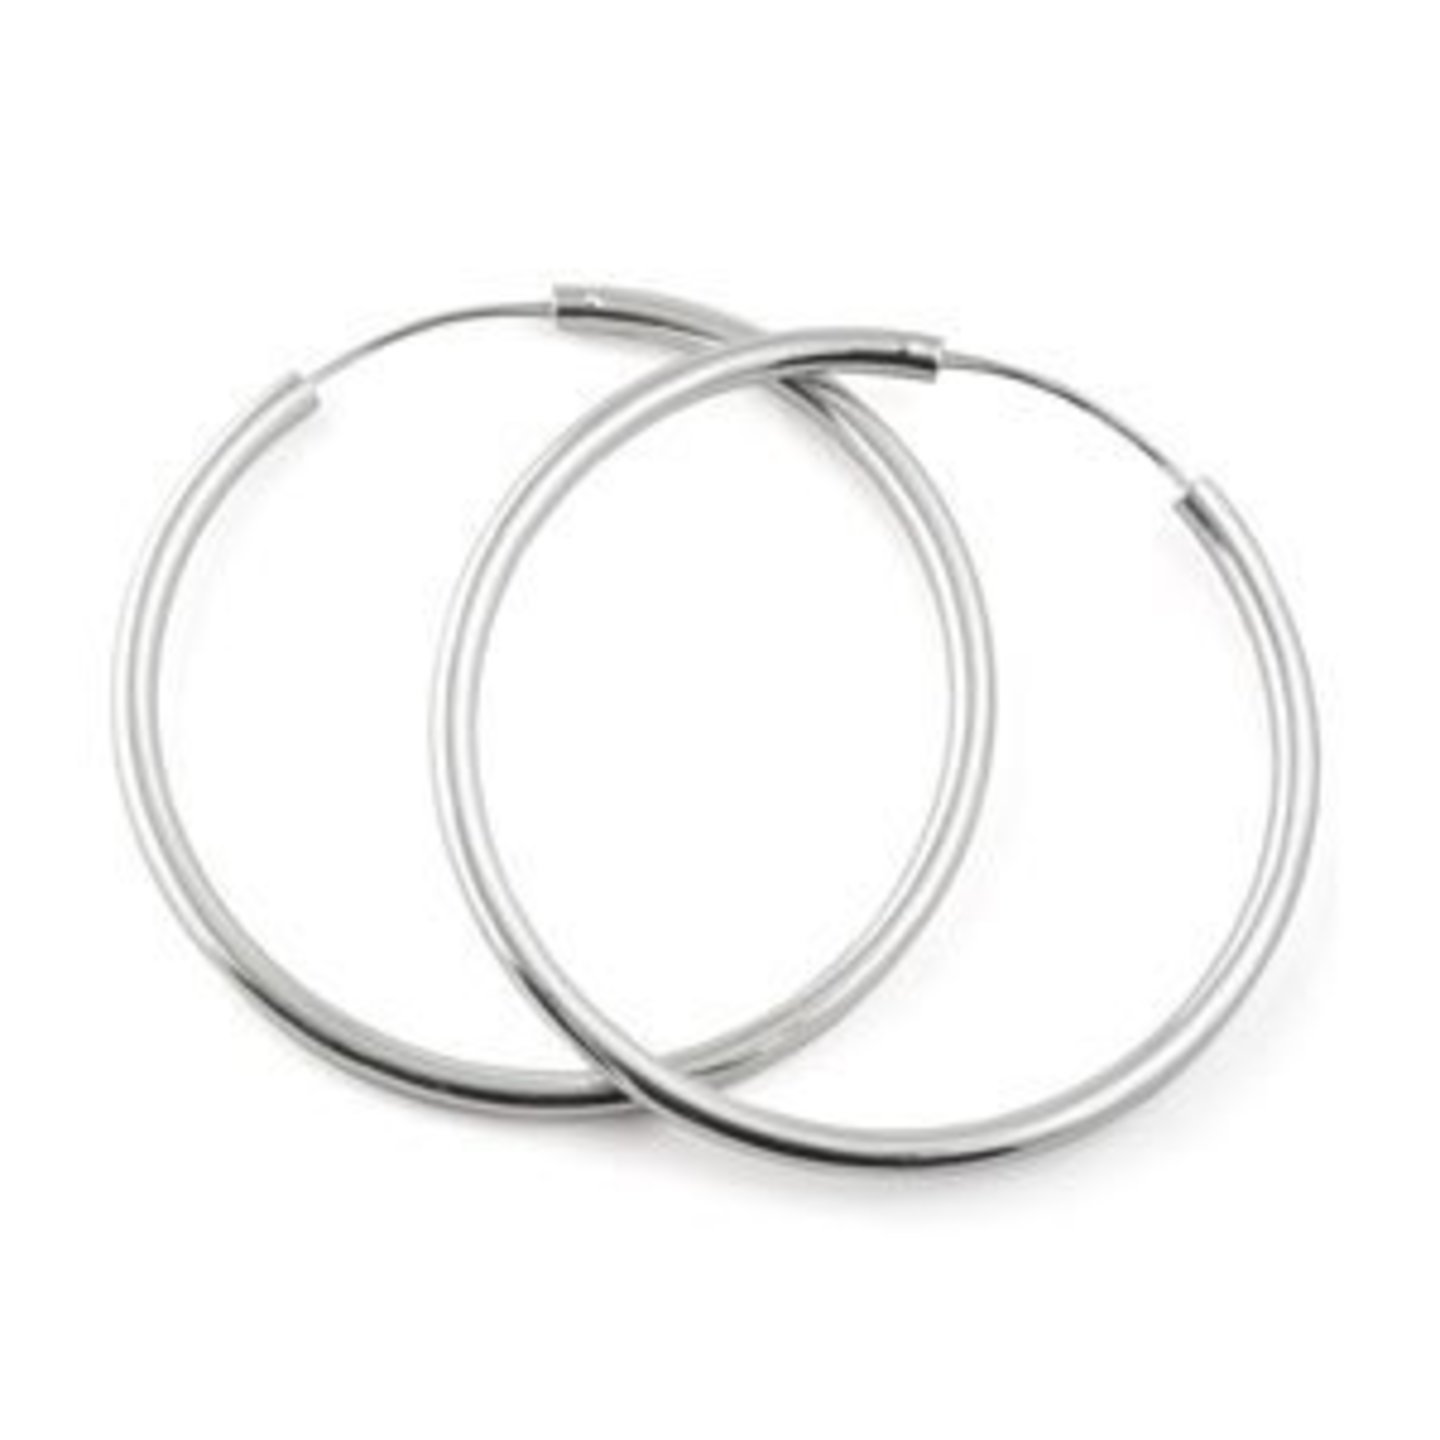 925 Sterling Silver Round Classic Hoop Earrings with 925 Hallmark & Certificate of Authenticity for Women 12mm